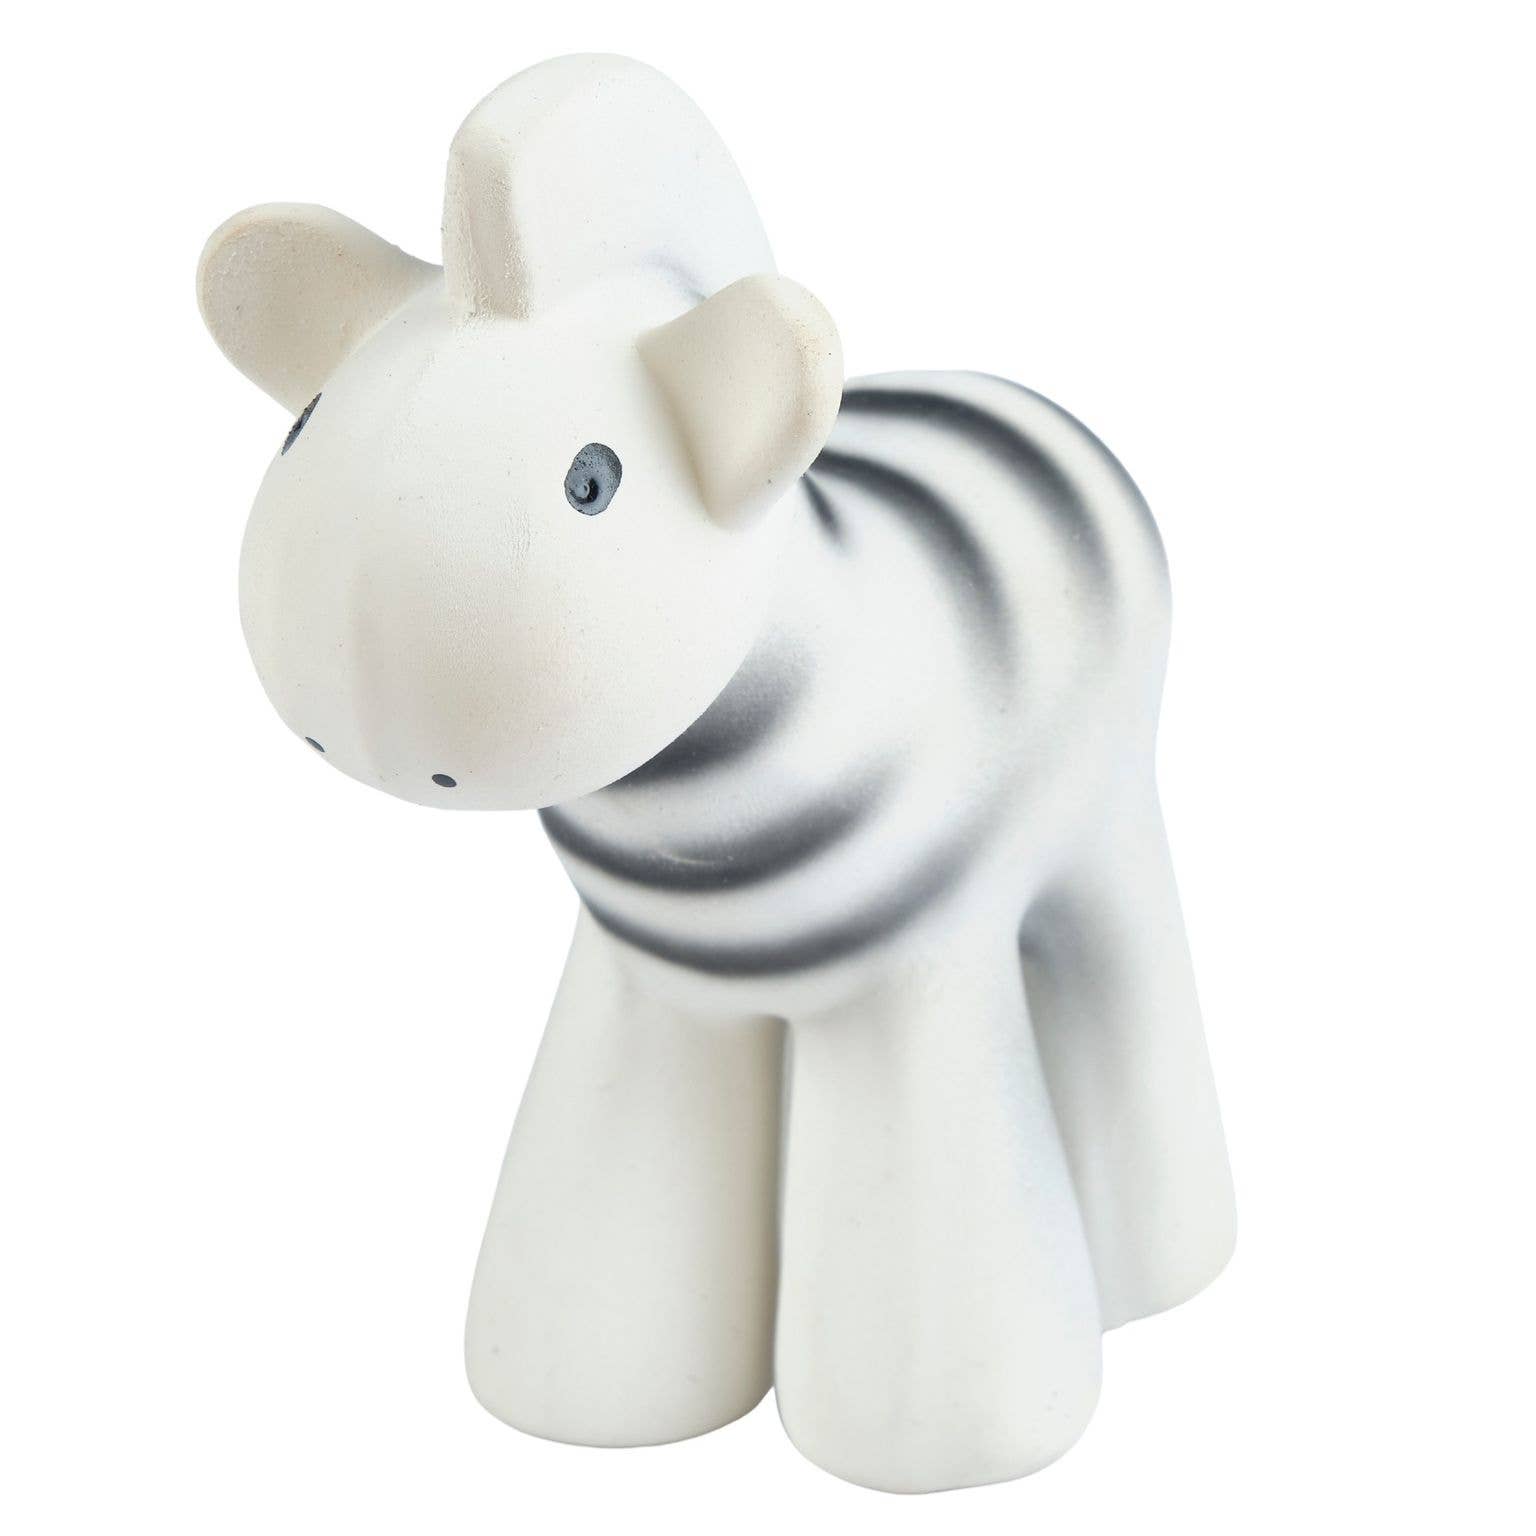 Zebra - Natural Organic Rubber Teether, Rattle & Bath Toy